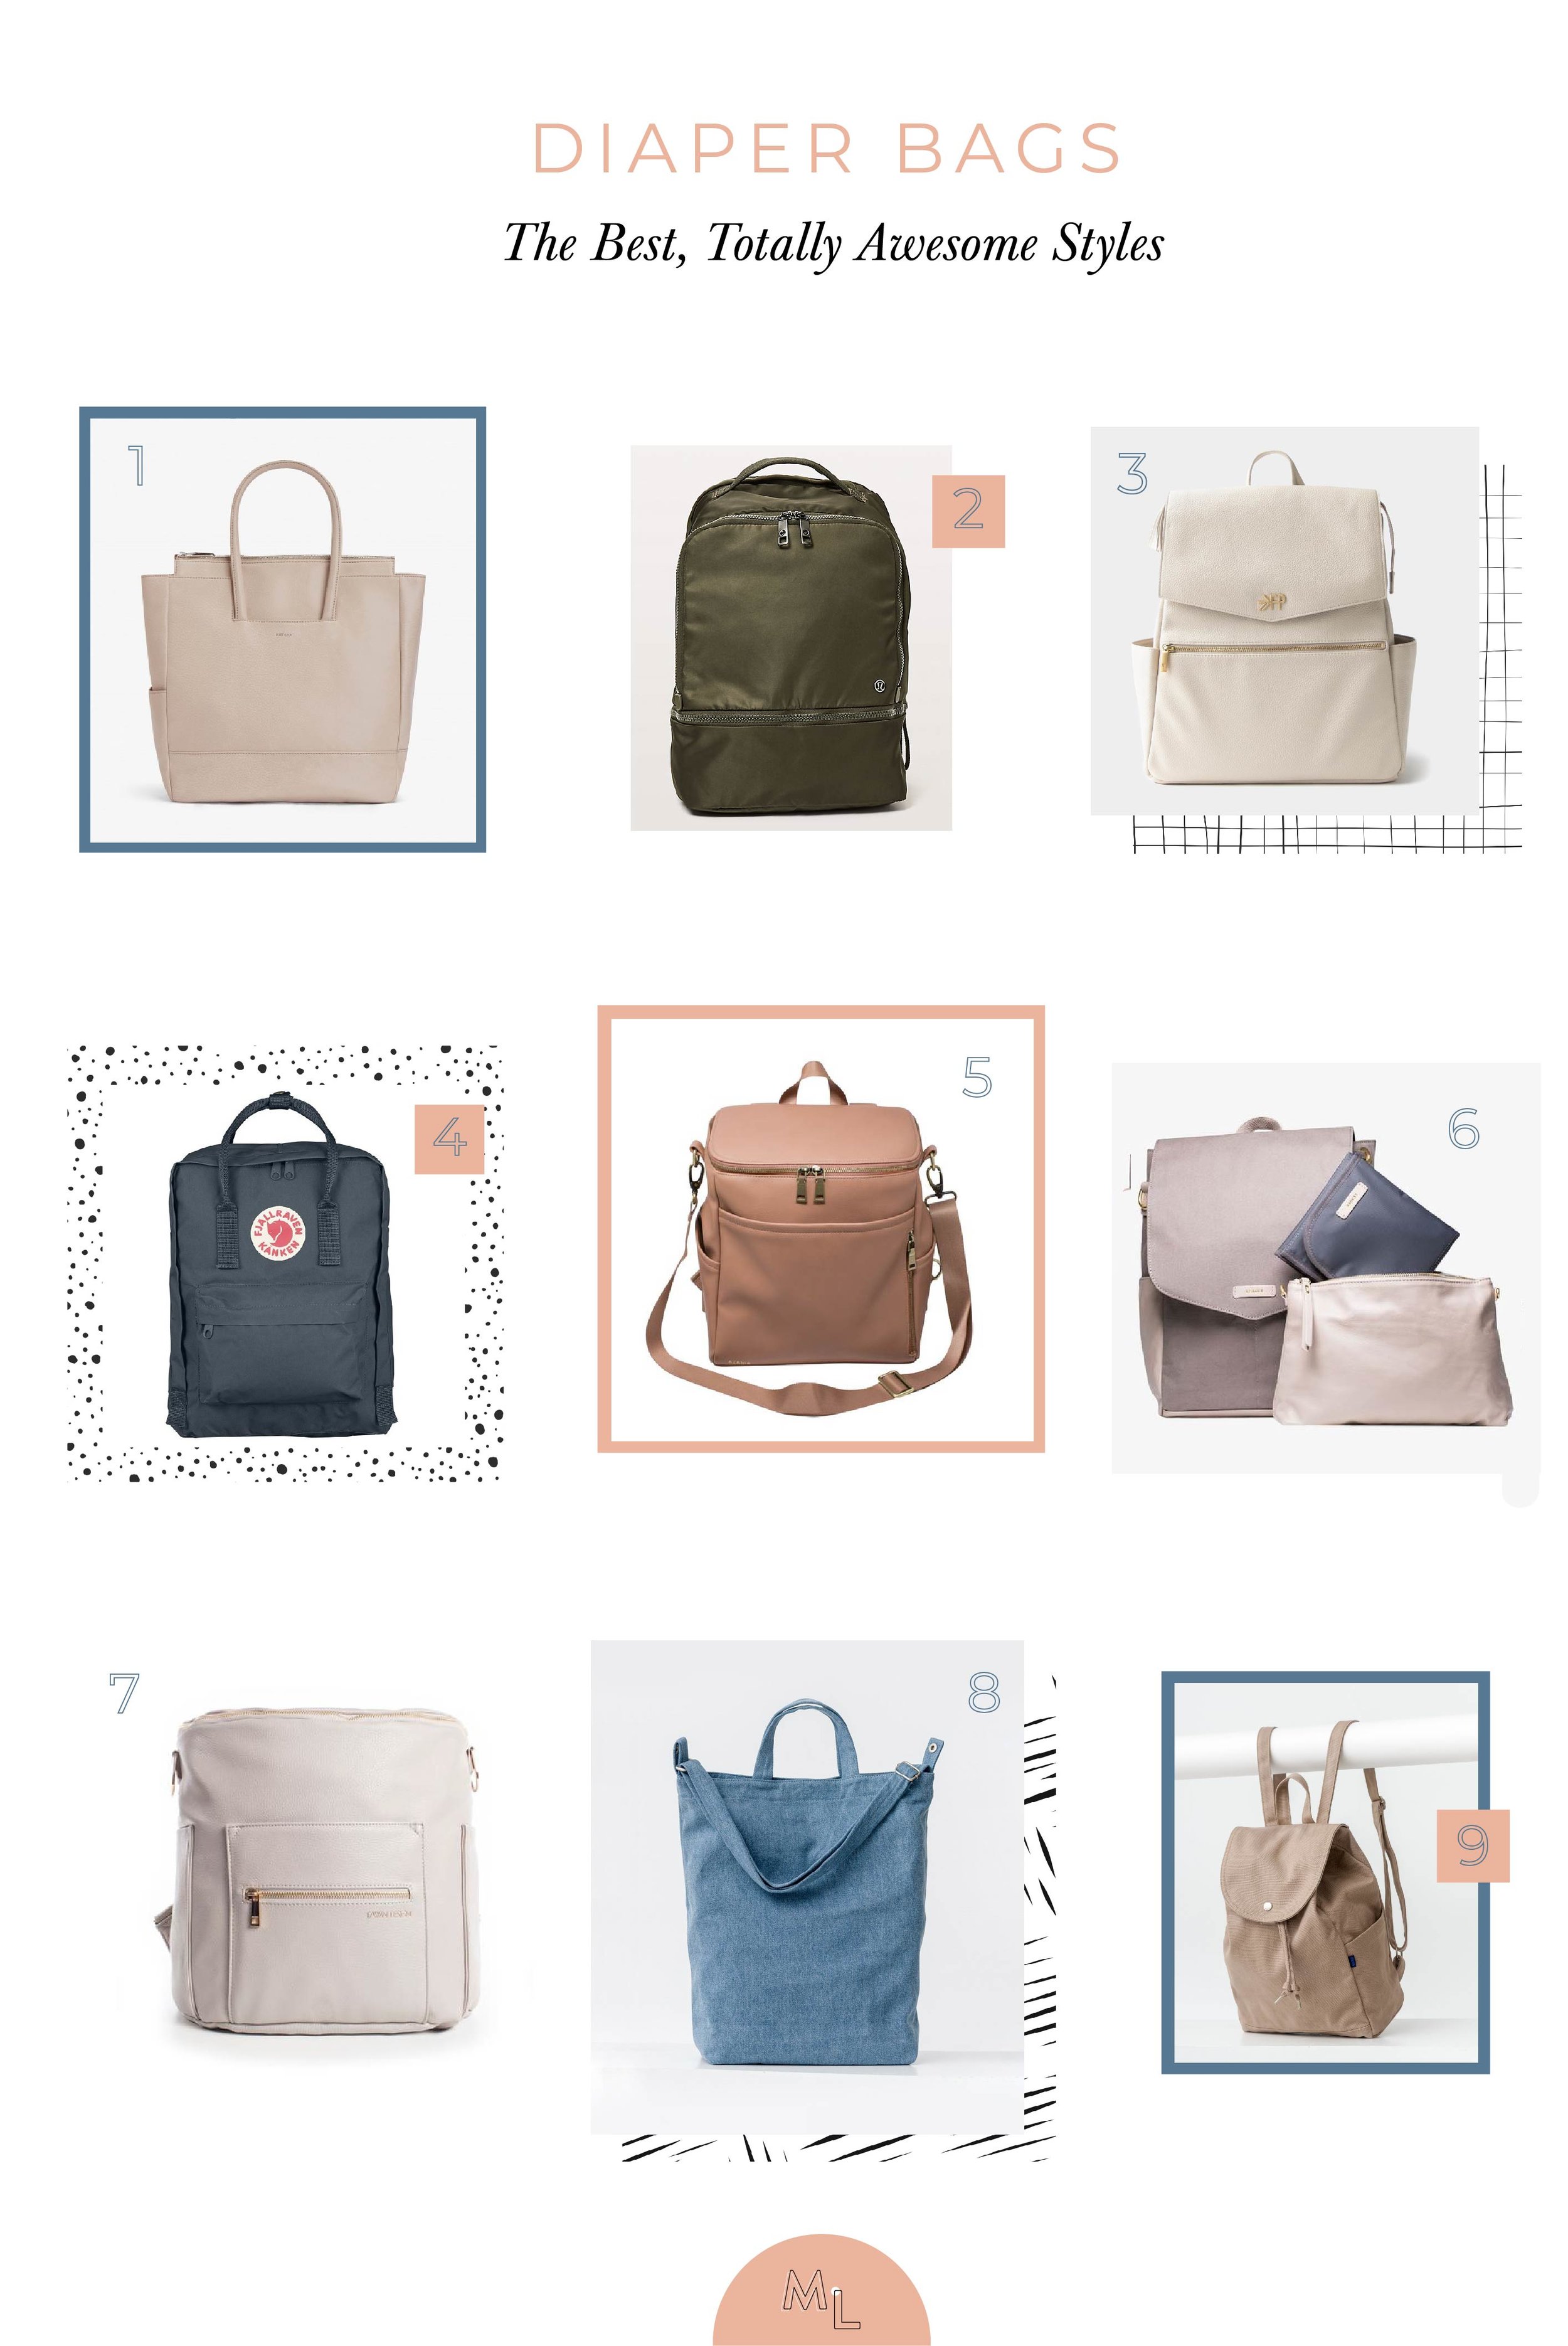 The Best Totally Awesome Diaper Bags 